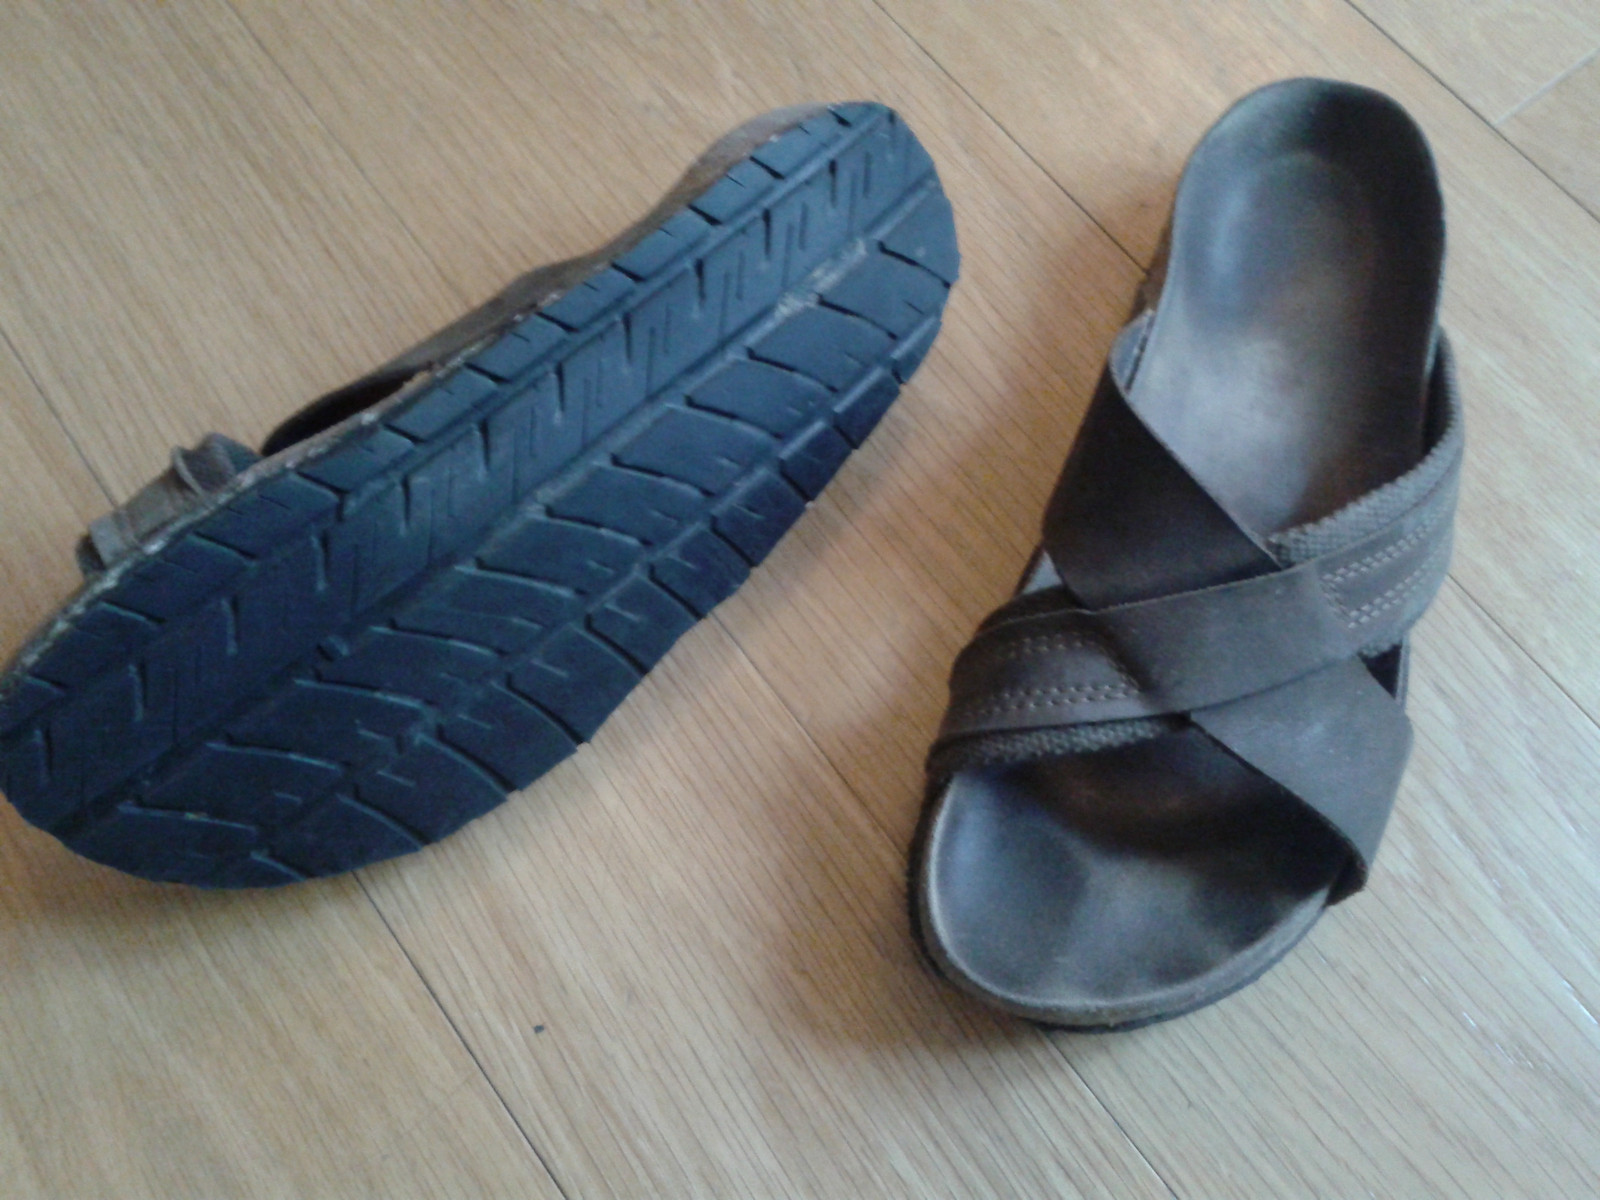 Resole Shoes With Old Tire Tread | Hackaday